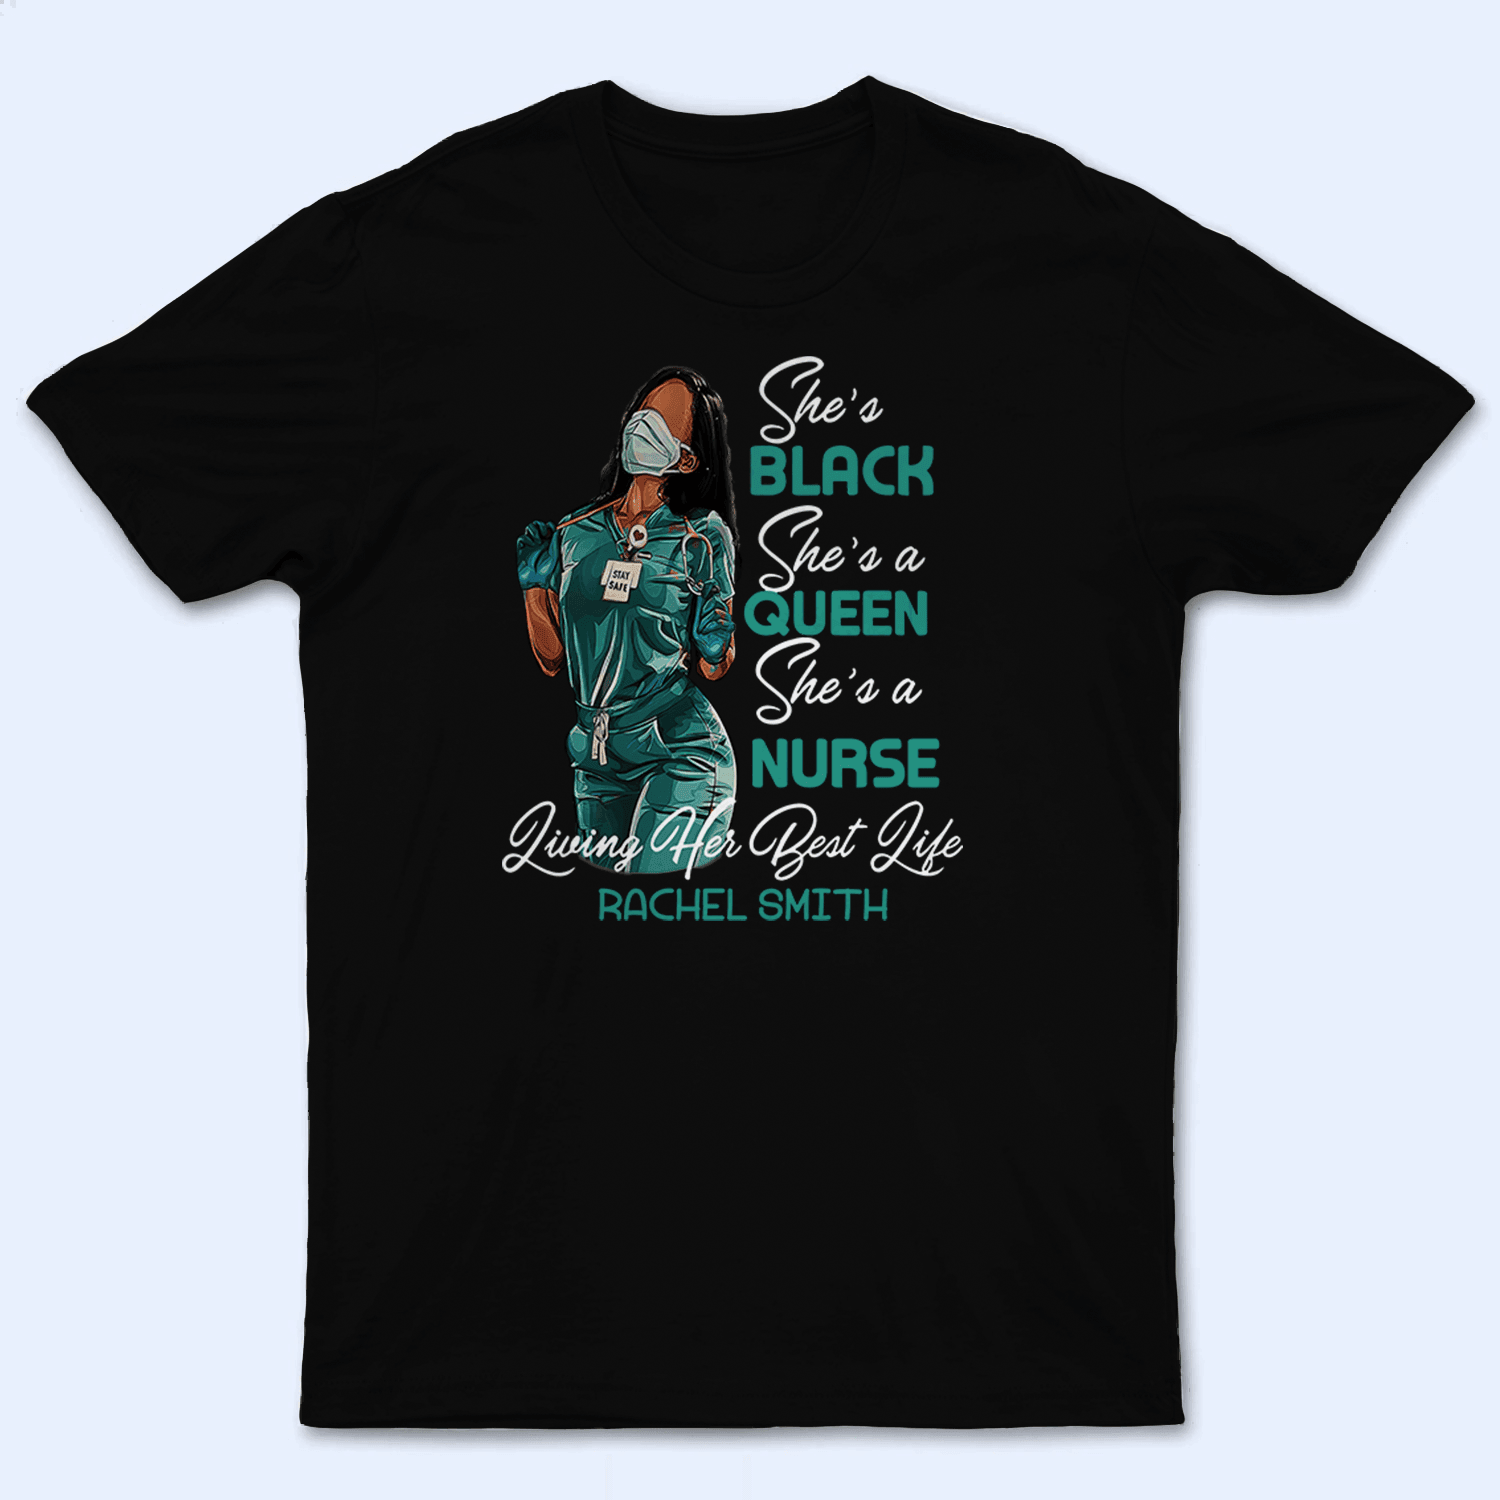 She's a queen She's a Nurse - Black Nurse - Personalized Custom T Shirt - Birthday, Loving, Funny Gift for Nurse, CNA, Healthcare, Registered RN - Suzitee Store